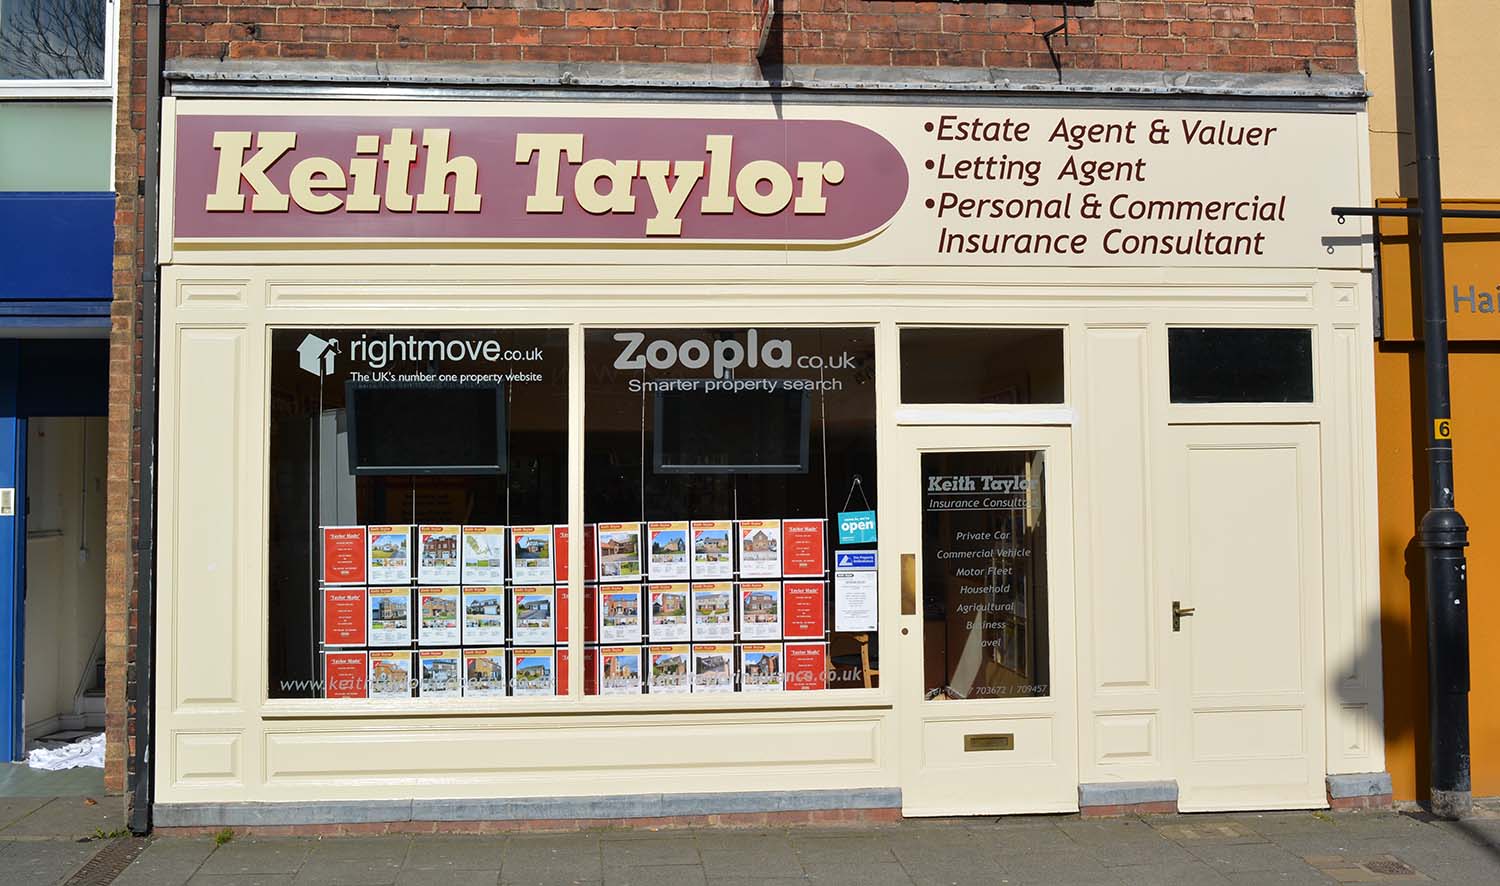 Keith Taylor Properties estate agency in Selby